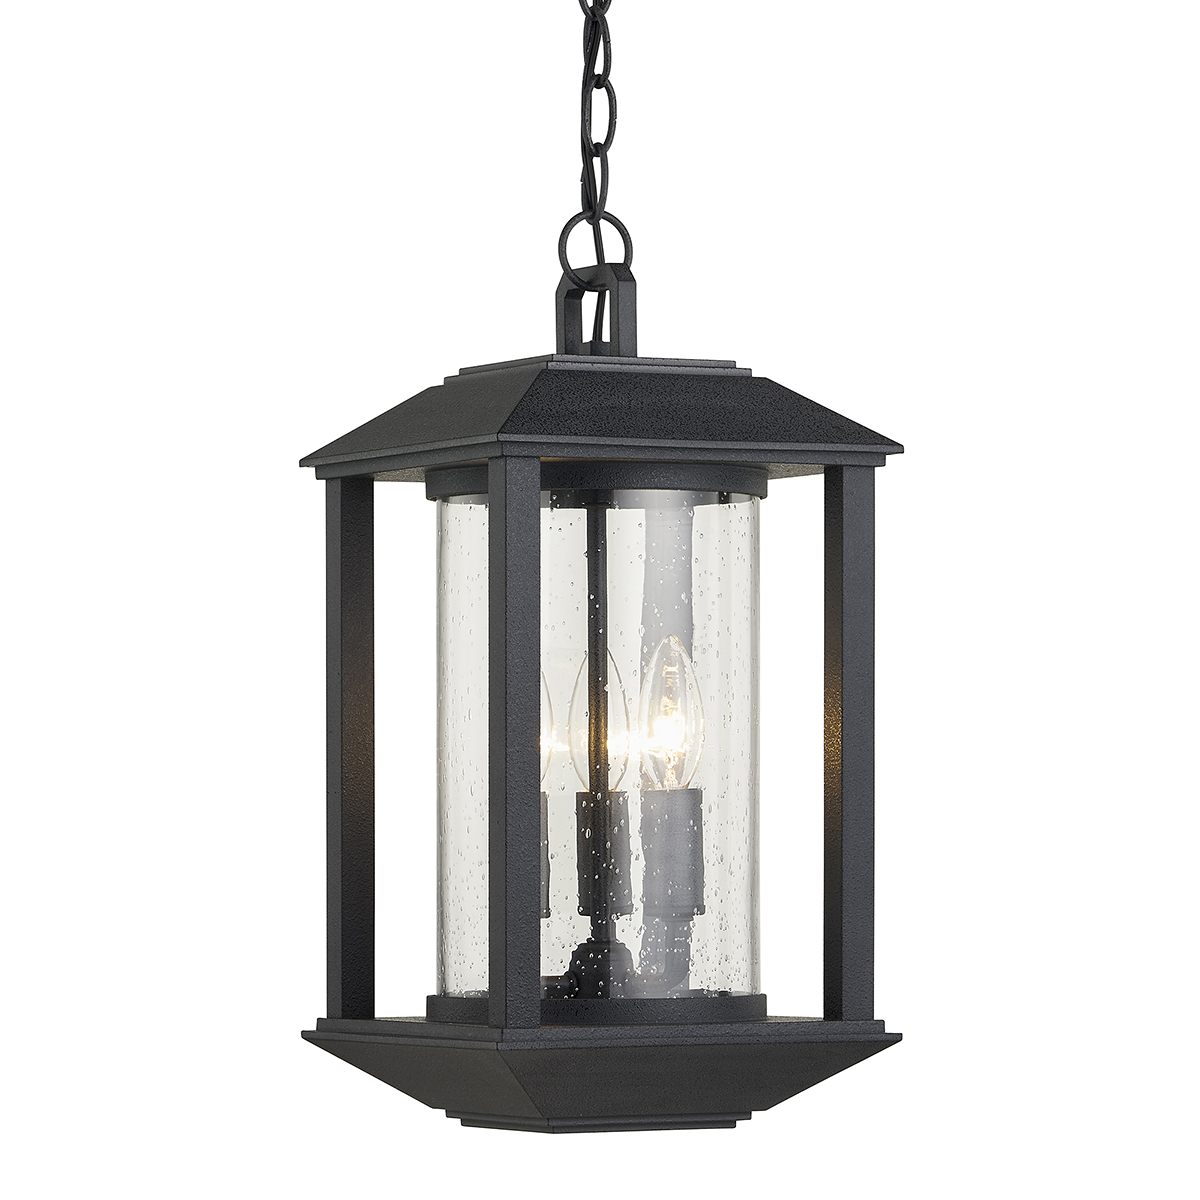 Troy Lighting MCCARTHY 3LT HANGER F7287 Outdoor l Wall Troy Lighting WEATHERED GRAPHITE  